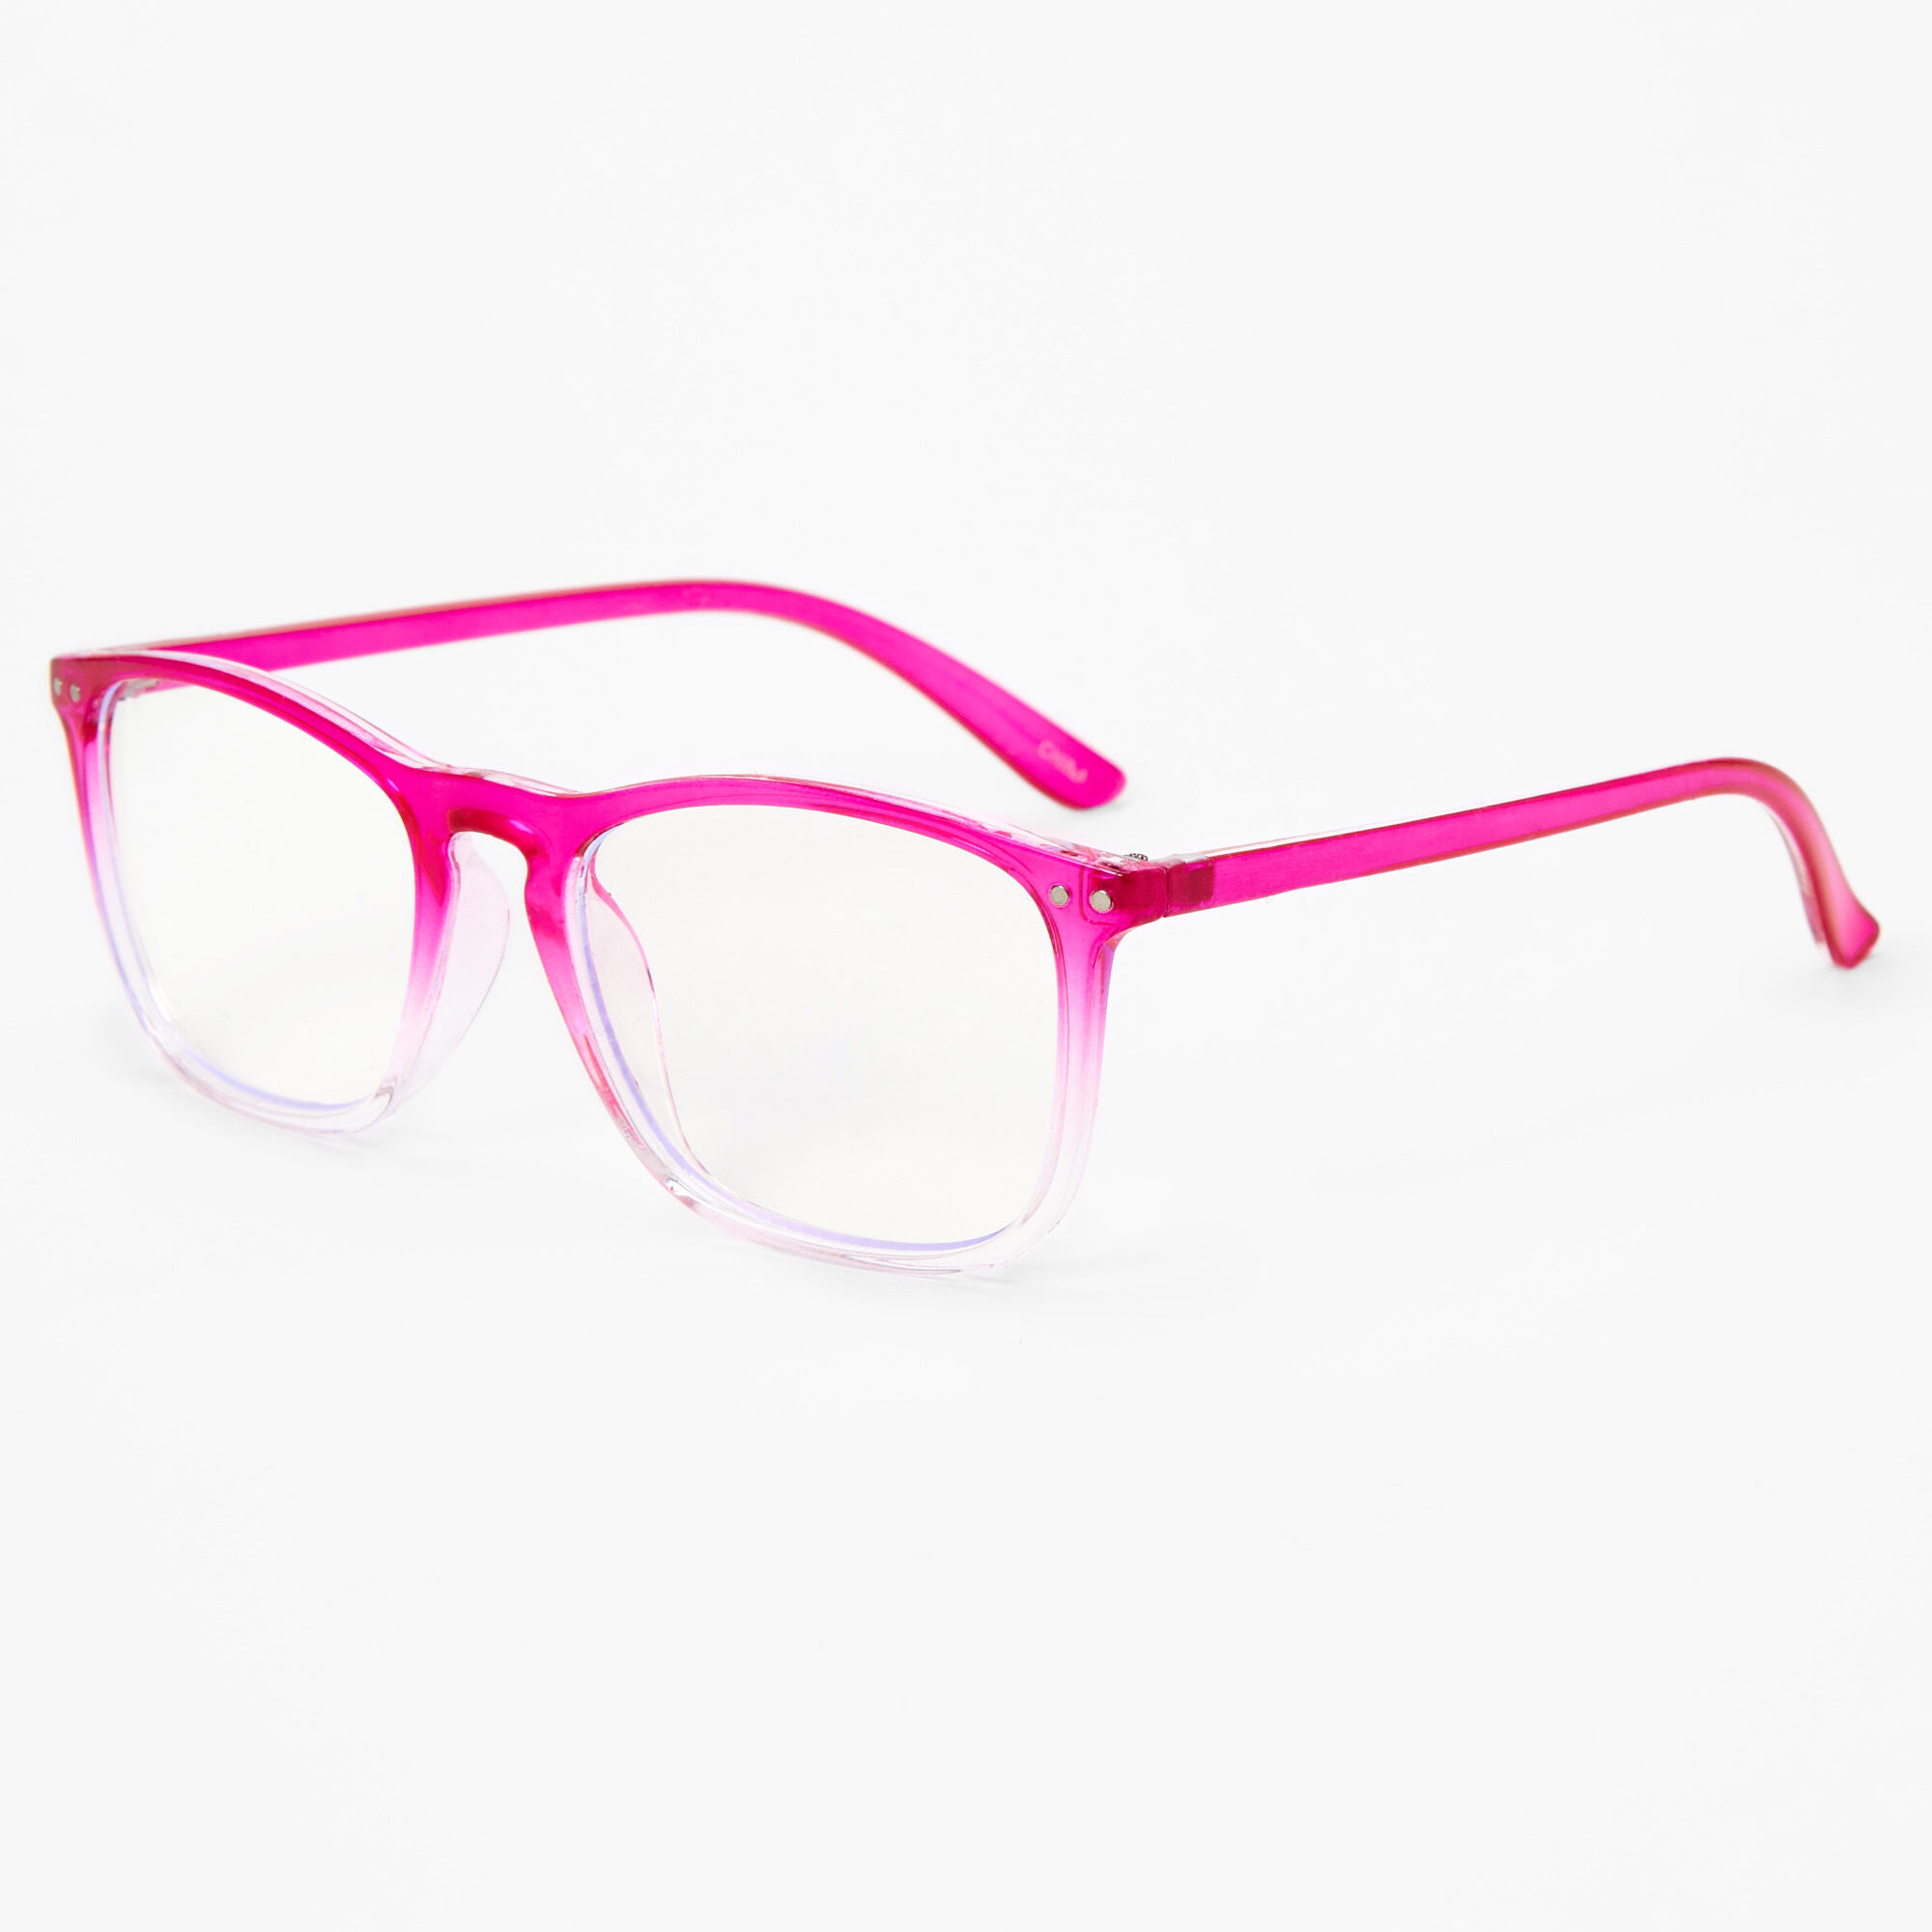 GLASSES ~ BARBIE DOLL ACCESSORY SILVER FRAME PINK LENS SUNGLASSES ACCESSORY 